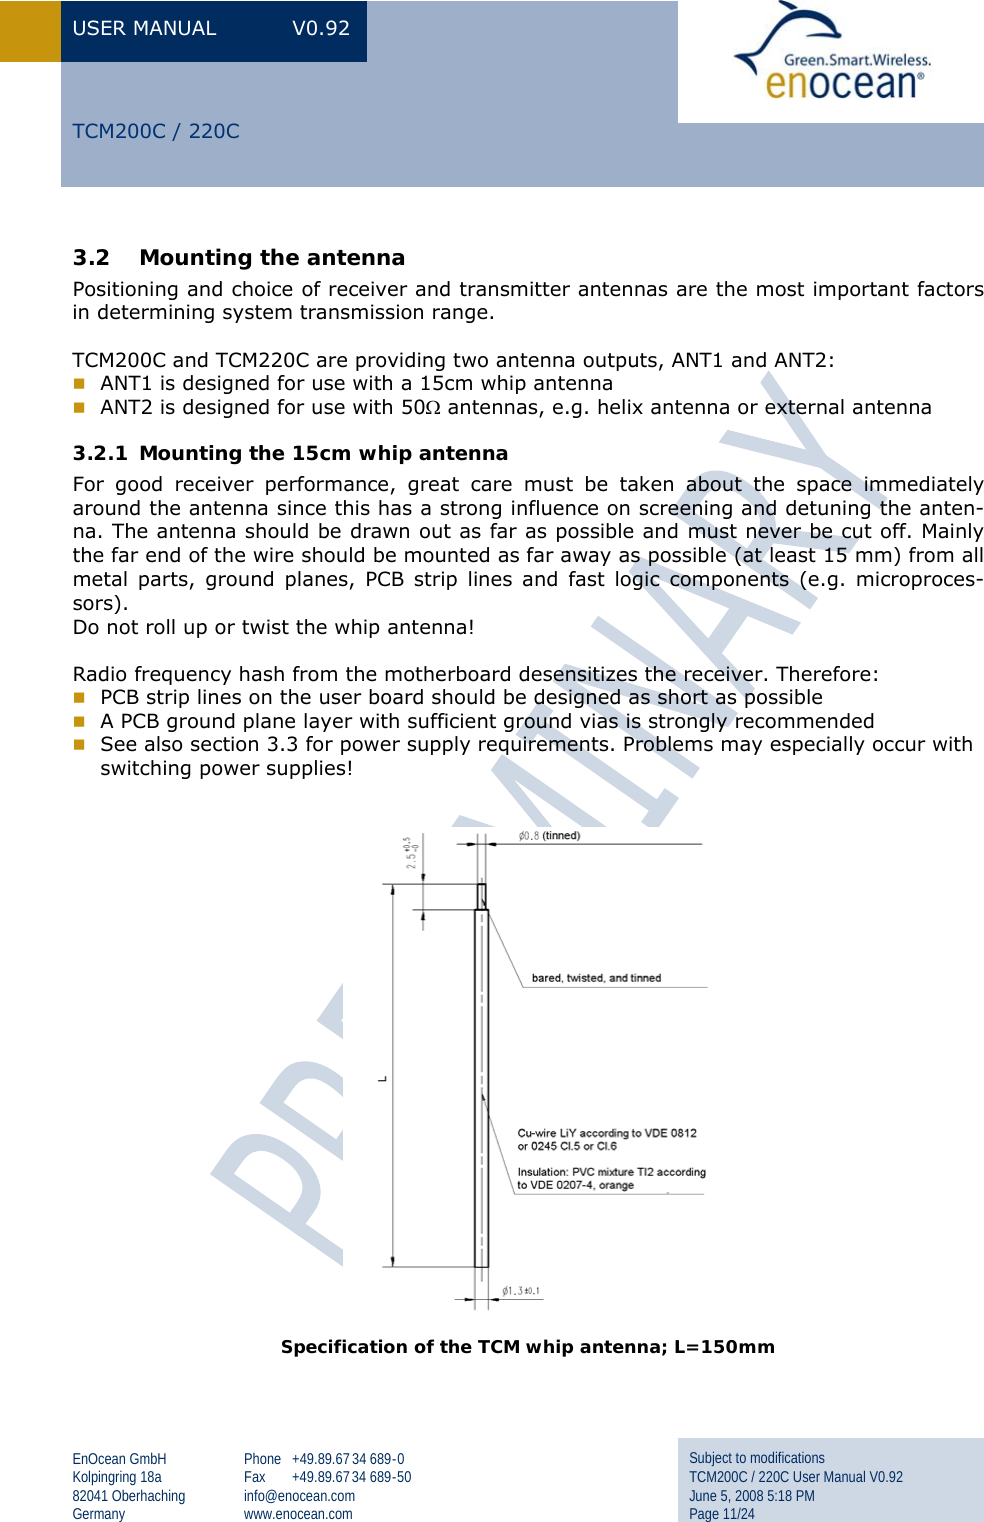 USER MANUAL  V0.92 EnOcean GmbH Kolpingring 18a 82041 Oberhaching Germany Phone +49.89.67 34 689-0 Fax +49.89.67 34 689-50 info@enocean.com www.enocean.com Subject to modifications TCM200C / 220C User Manual V0.92 June 5, 2008 5:18 PM Page 11/24  TCM200C / 220C 3.2 Mounting the antenna Positioning and choice of receiver and transmitter antennas are the most important factors in determining system transmission range.   TCM200C and TCM220C are providing two antenna outputs, ANT1 and ANT2:  ANT1 is designed for use with a 15cm whip antenna  ANT2 is designed for use with 50Ω antennas, e.g. helix antenna or external antenna 3.2.1 Mounting the 15cm whip antenna For good receiver performance, great care must be taken about the space immediately around the antenna since this has a strong influence on screening and detuning the anten-na. The antenna should be drawn out as far as possible and must never be cut off. Mainly the far end of the wire should be mounted as far away as possible (at least 15 mm) from all metal parts, ground planes, PCB strip lines and fast logic components (e.g. microproces-sors).  Do not roll up or twist the whip antenna!  Radio frequency hash from the motherboard desensitizes the receiver. Therefore:  PCB strip lines on the user board should be designed as short as possible  A PCB ground plane layer with sufficient ground vias is strongly recommended   See also section 3.3 for power supply requirements. Problems may especially occur with switching power supplies!     Specification of the TCM whip antenna; L=150mm    